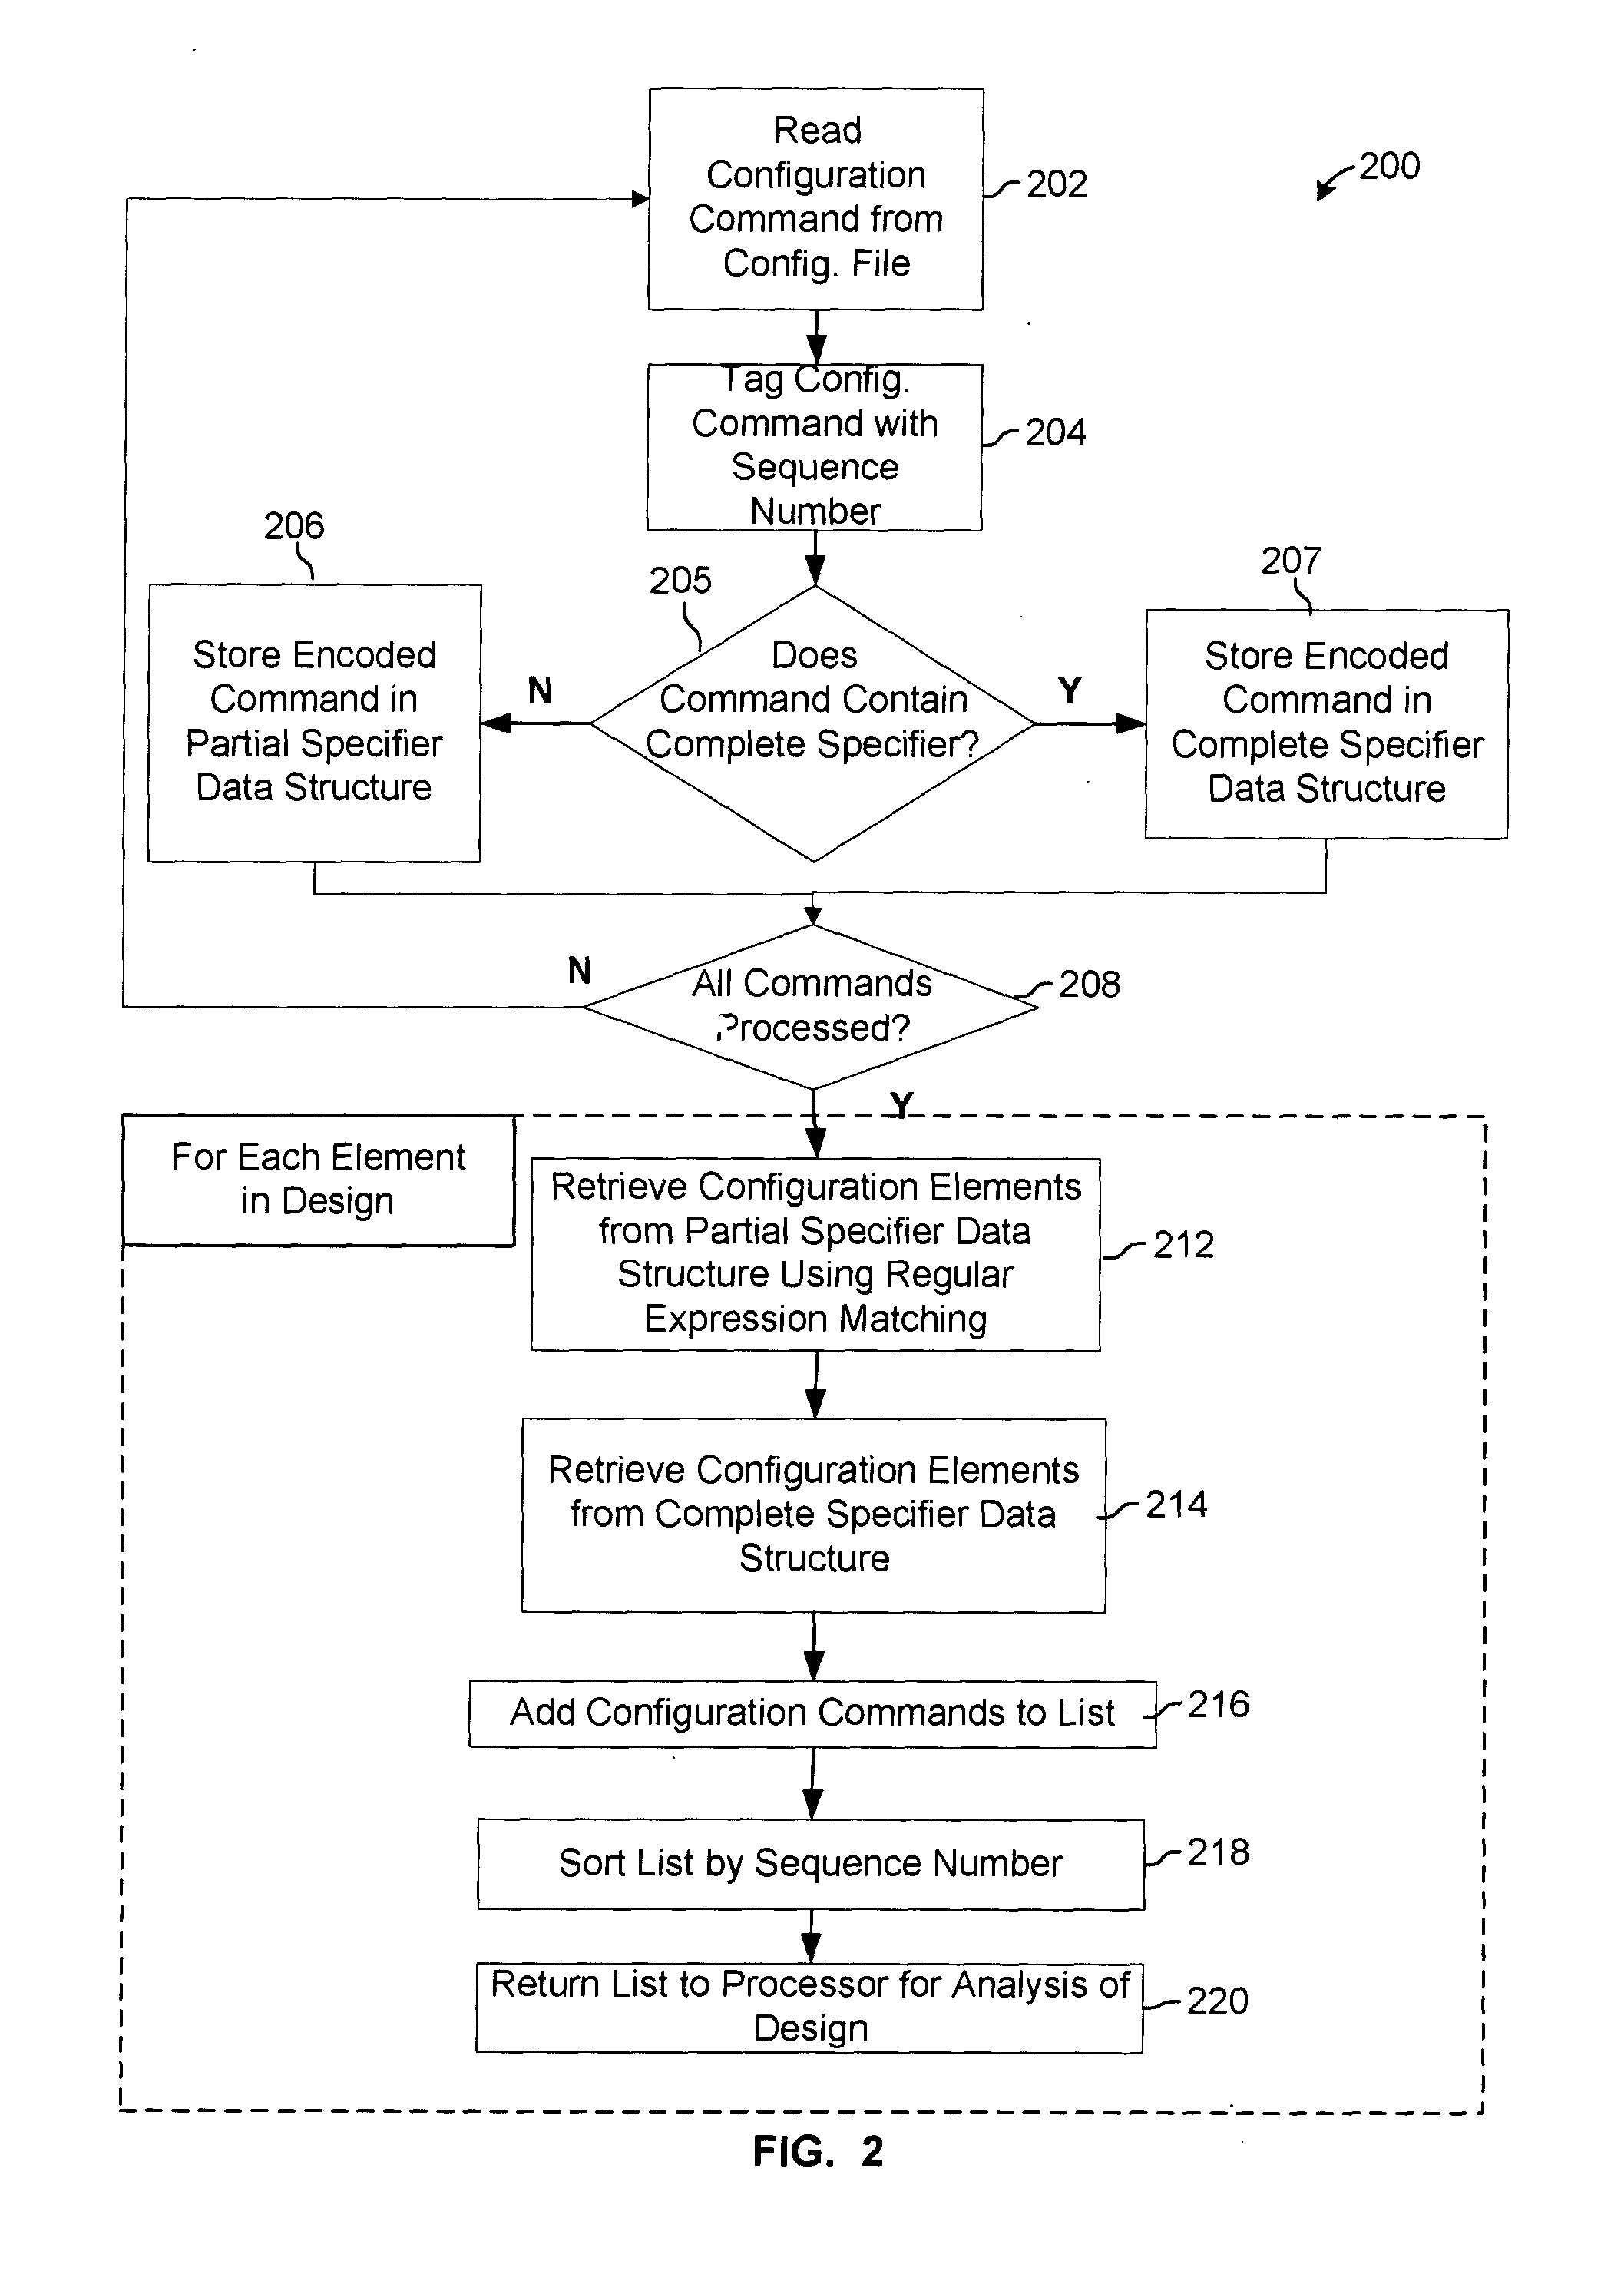 System and method analyzing design elements in computer aided design tools